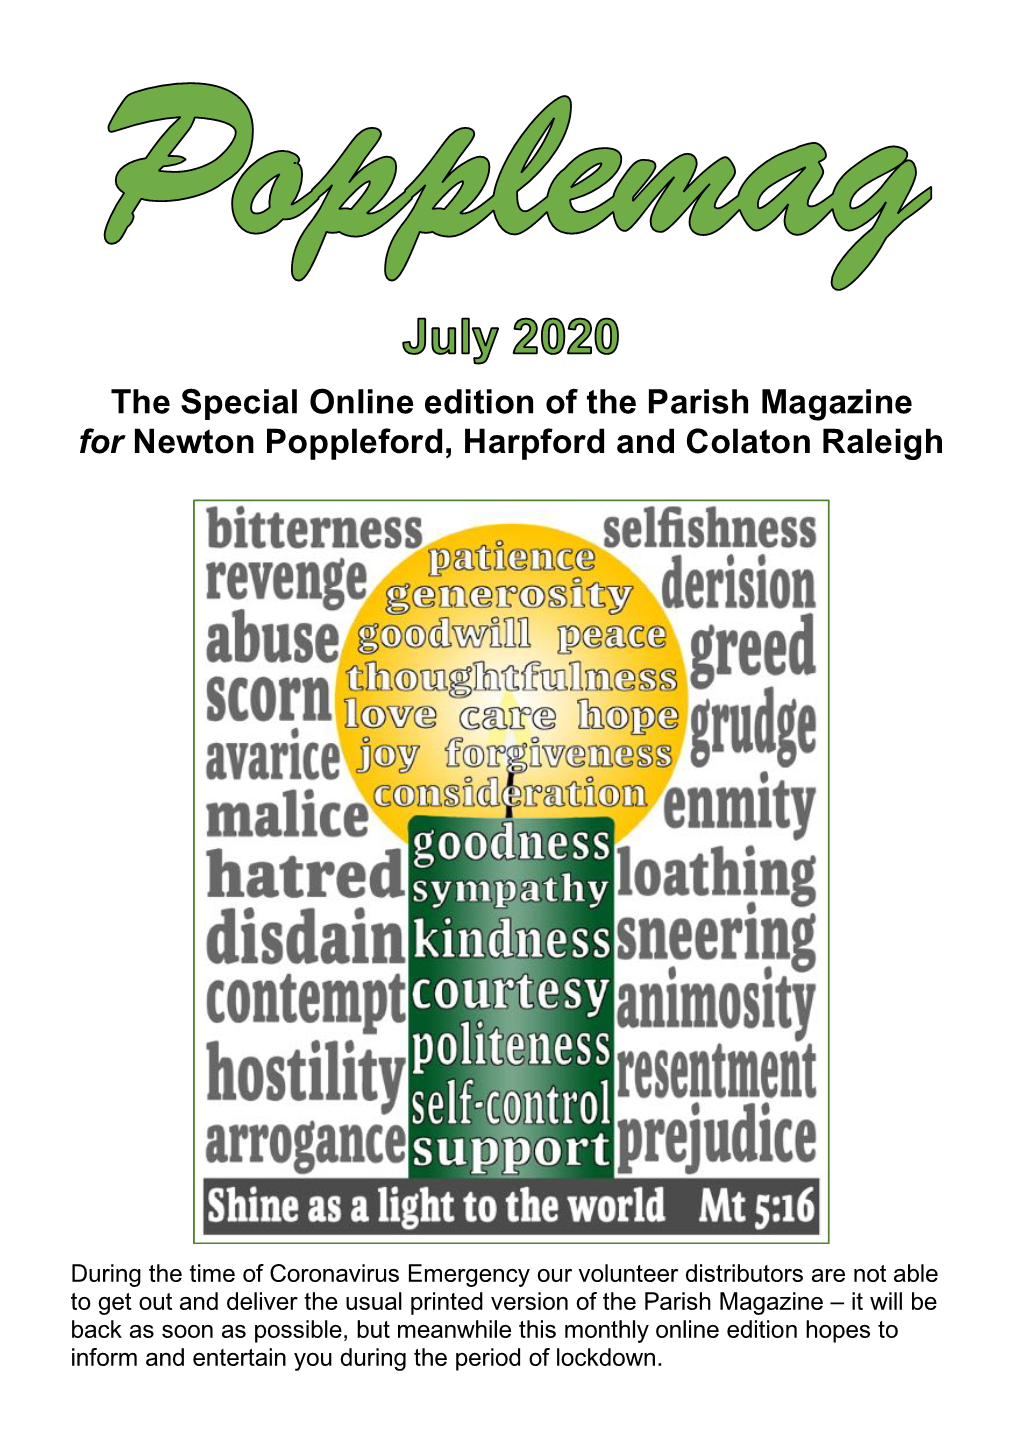 The Special Online Edition of the Parish Magazine for Newton Poppleford, Harpford and Colaton Raleigh